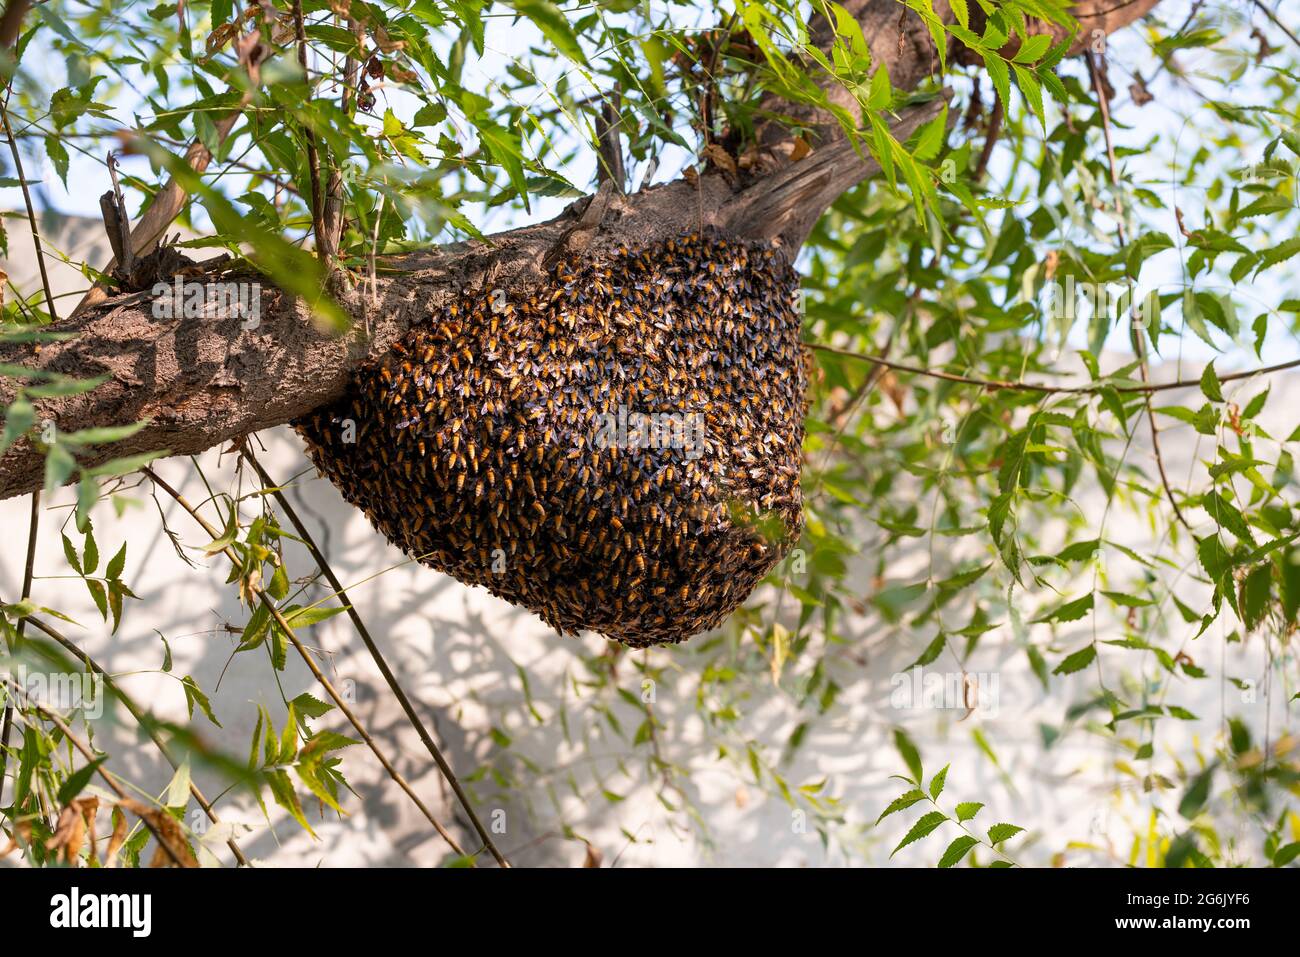 Honeybee swarm hanging on the tree, Swarm of bees building a new hive surrounding the tree. Stock Photo